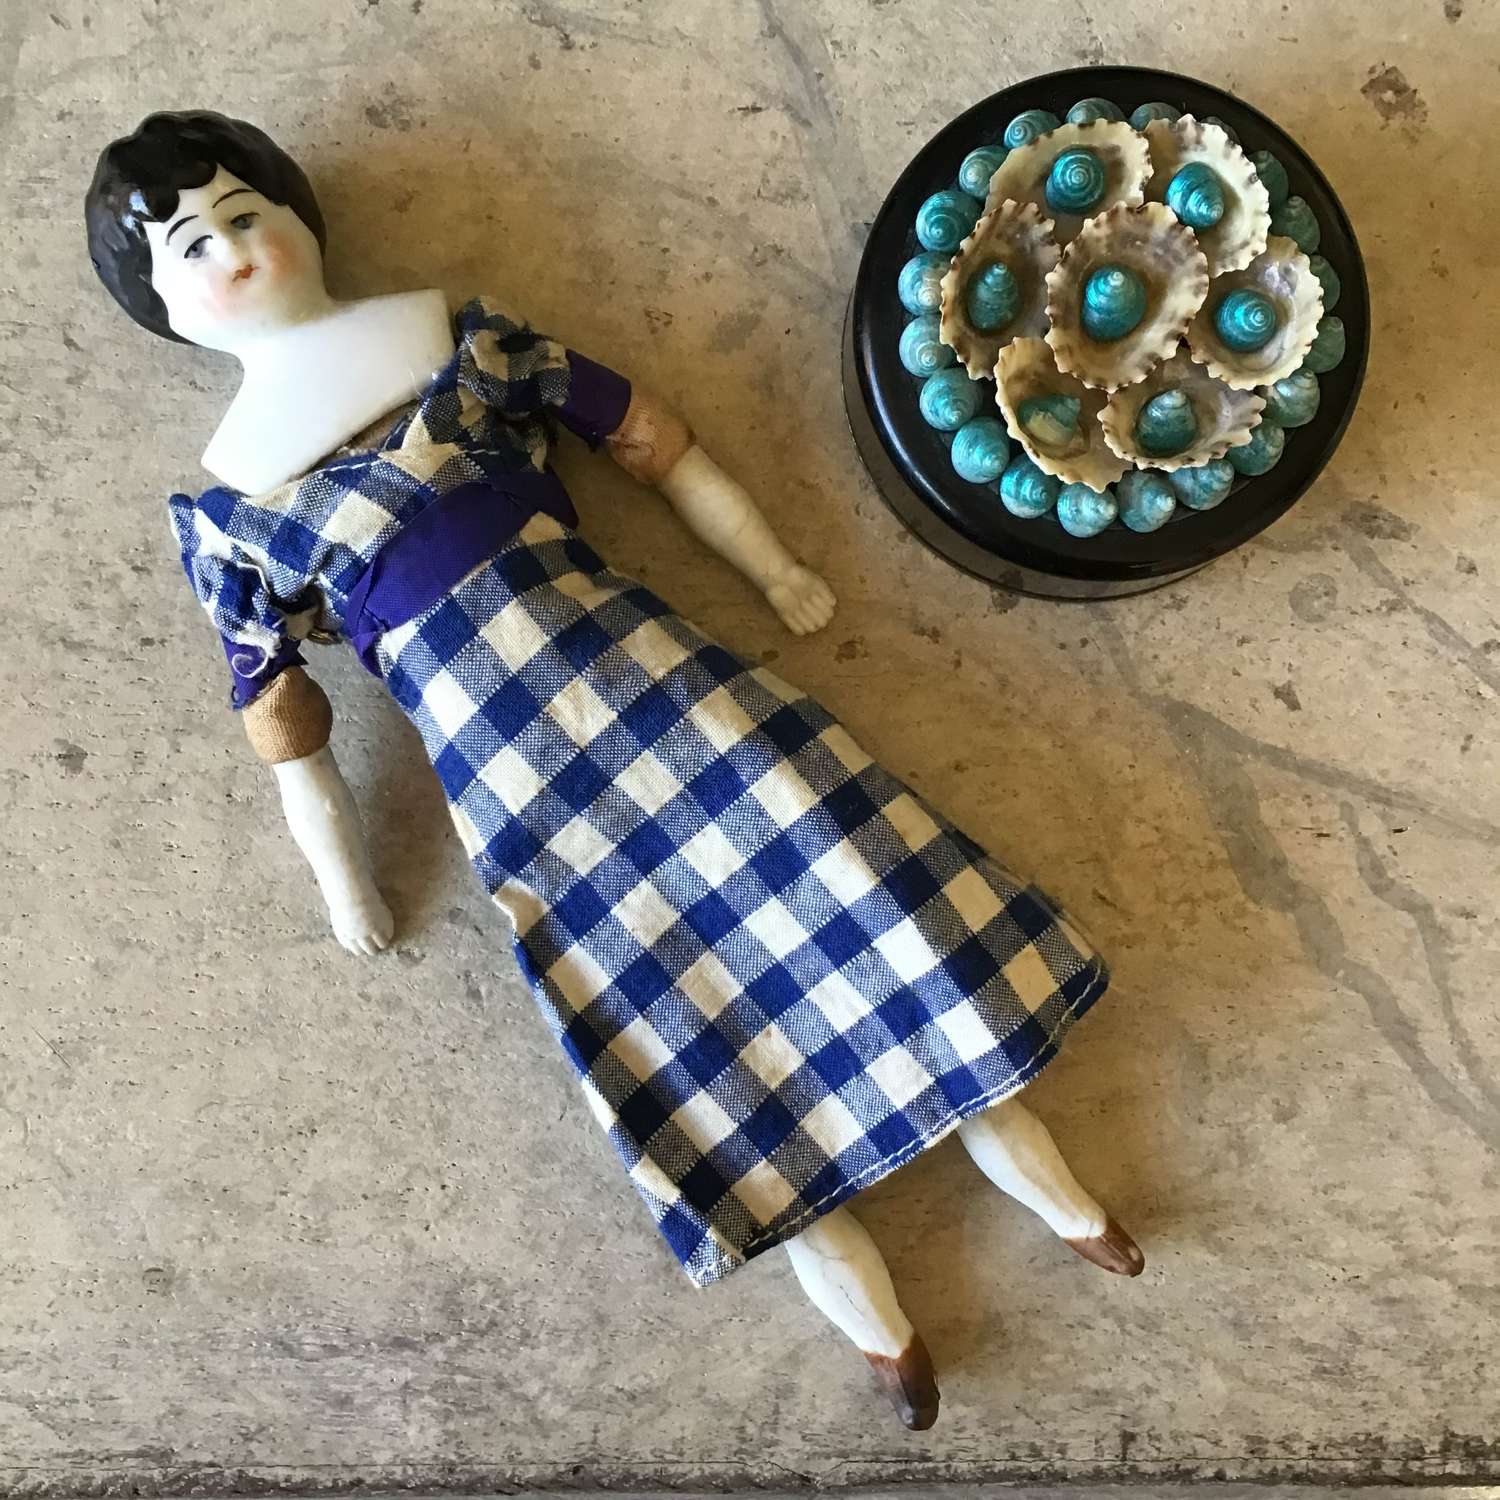 Antique dressed china dolly